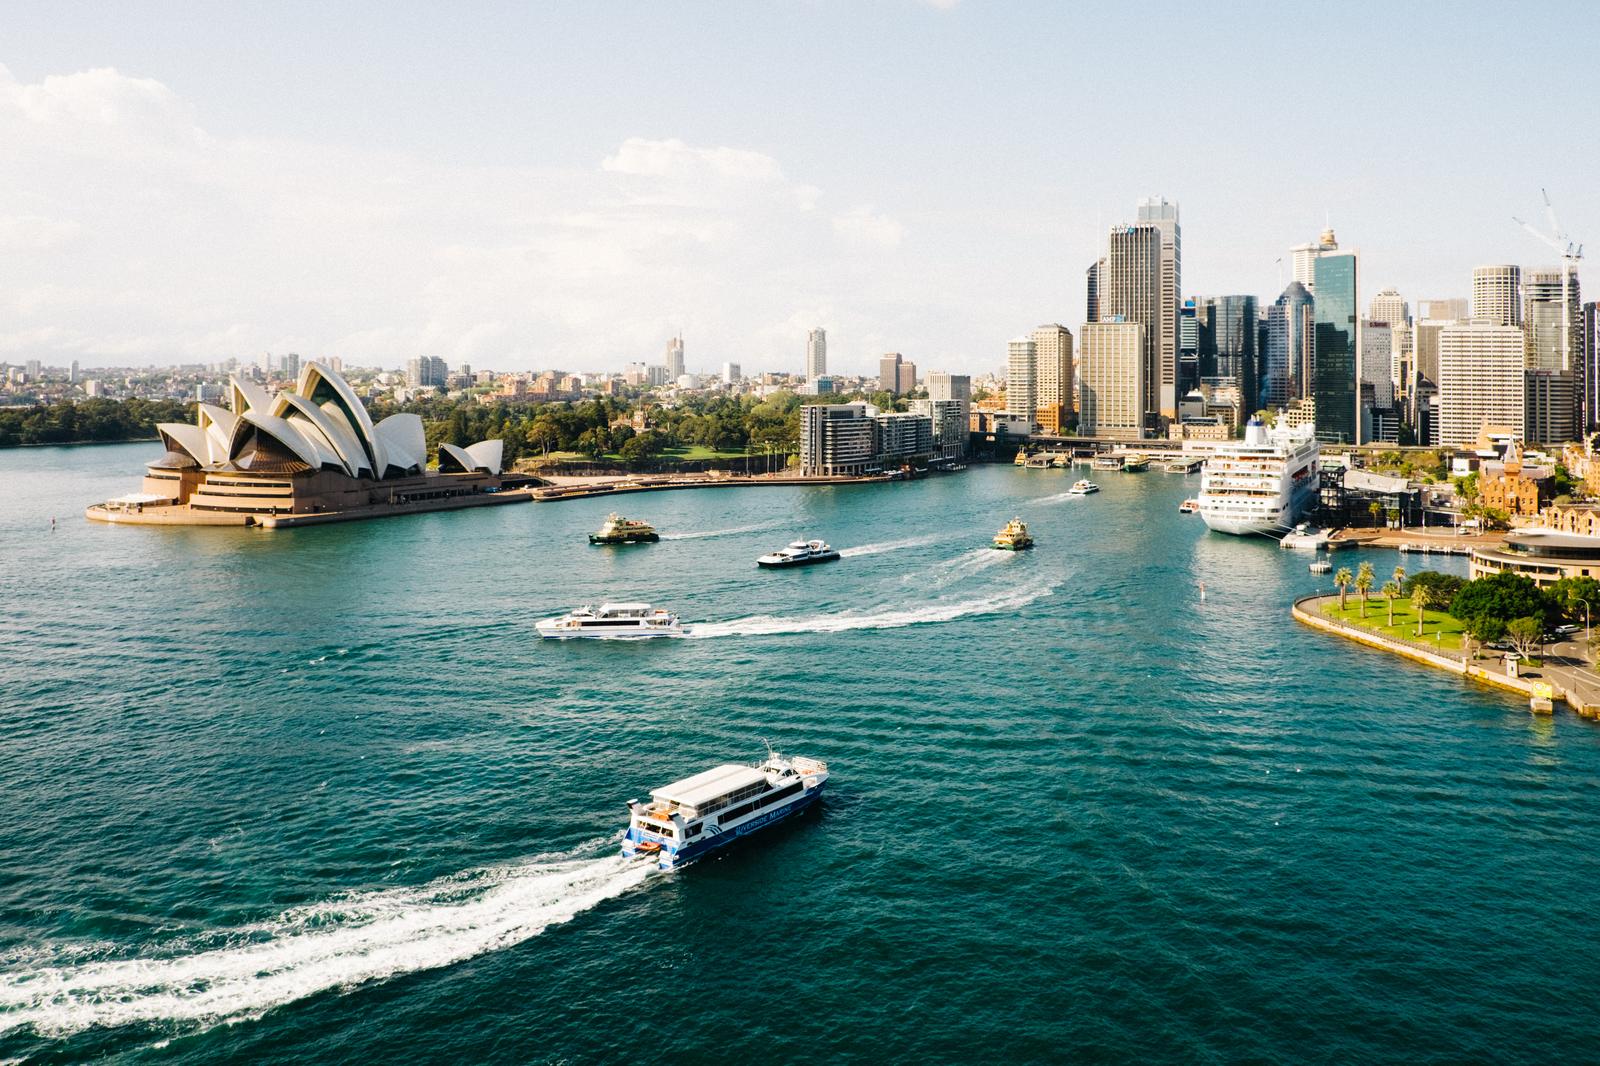 Name That City! Put Your Travel Knowledge to Test With This Picture Quiz! Sydney, Australia